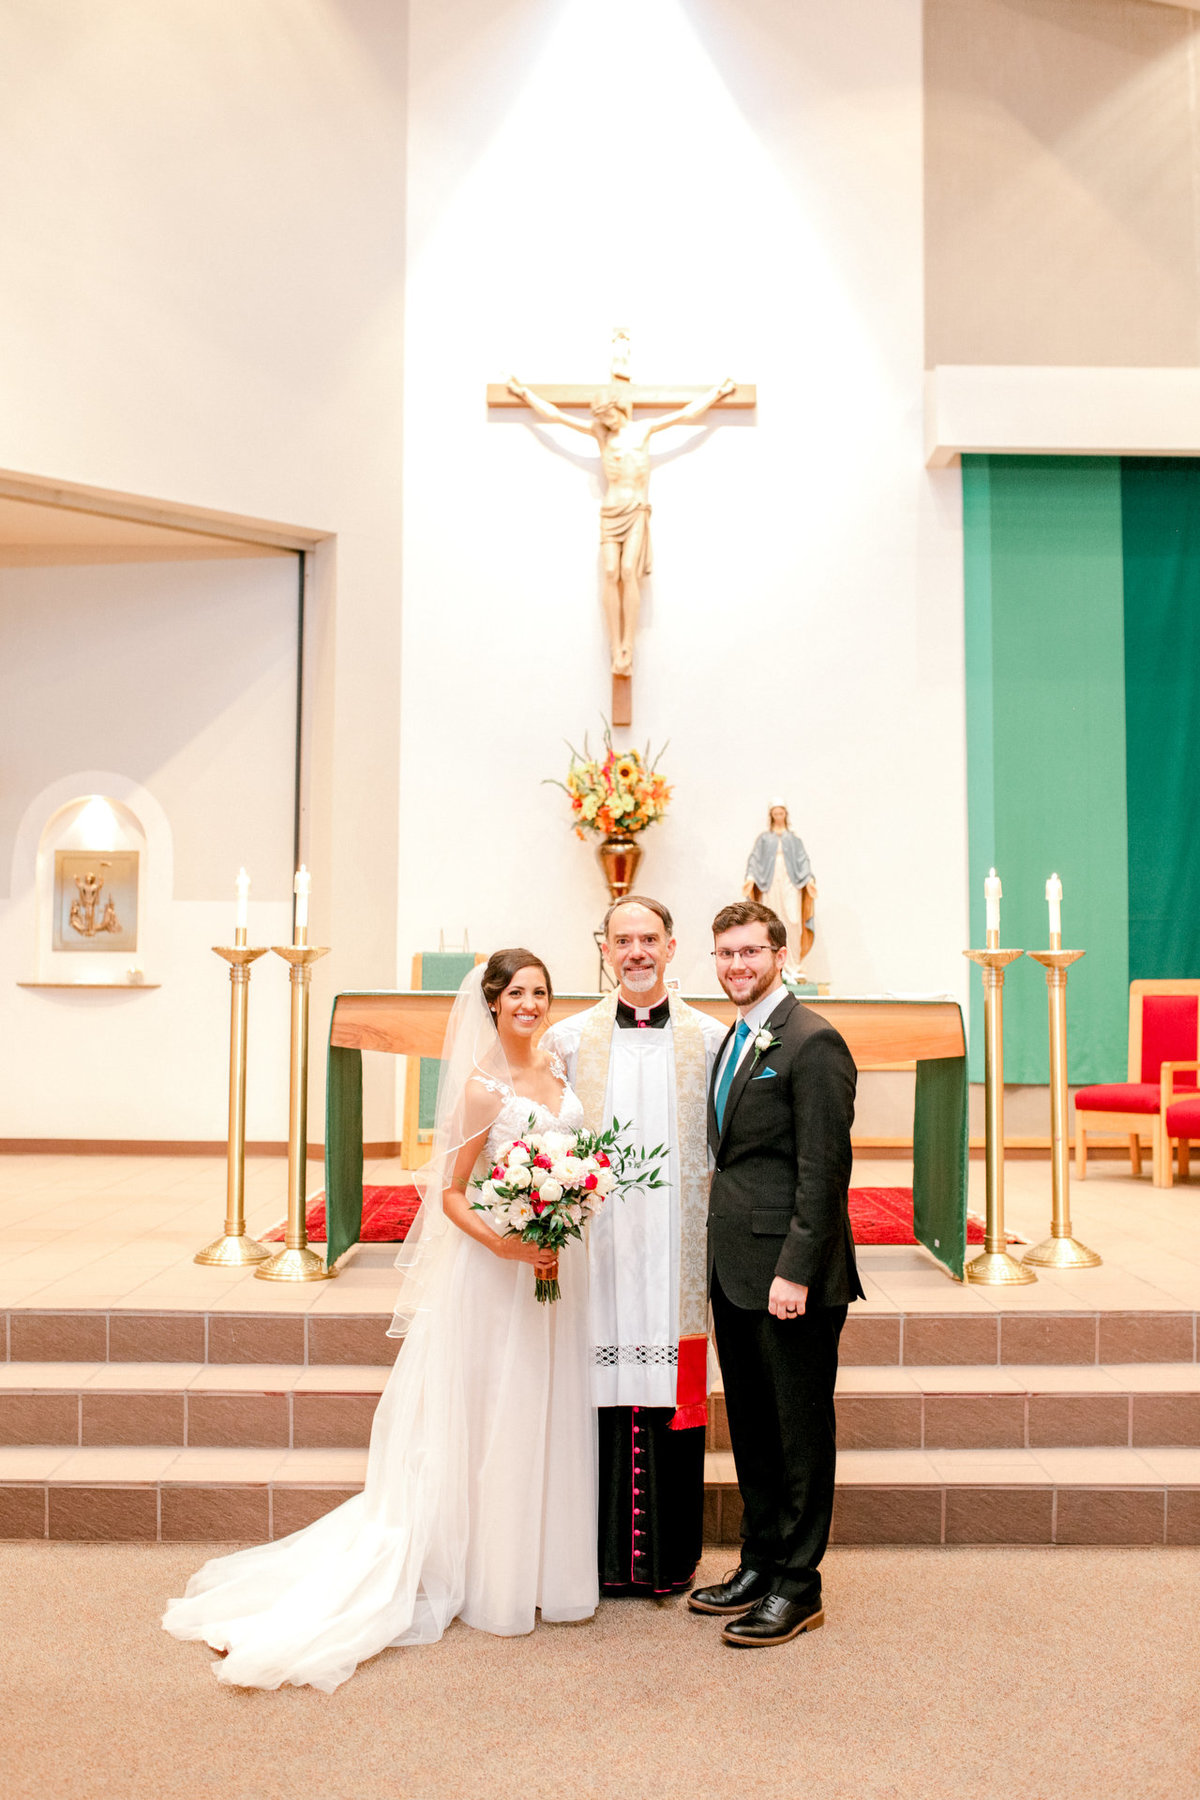 Albuquerque Wedding Photographer_Our Lady of the Annunciation Parish_www.tylerbrooke.com_026